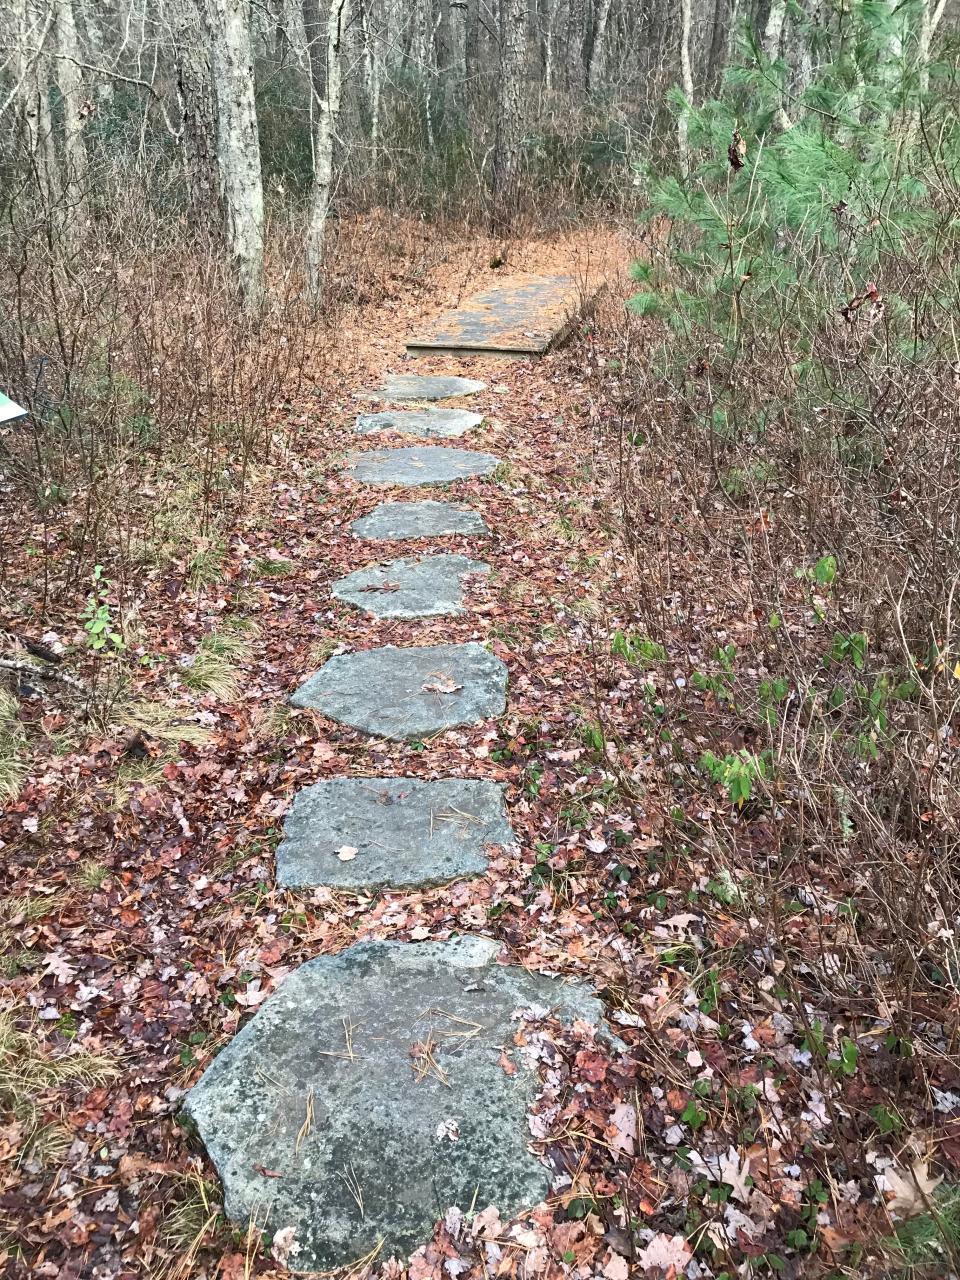 The blue-blazed trail at Browning Woods crosses flat fieldstones across an area that is swampy in some seasons.